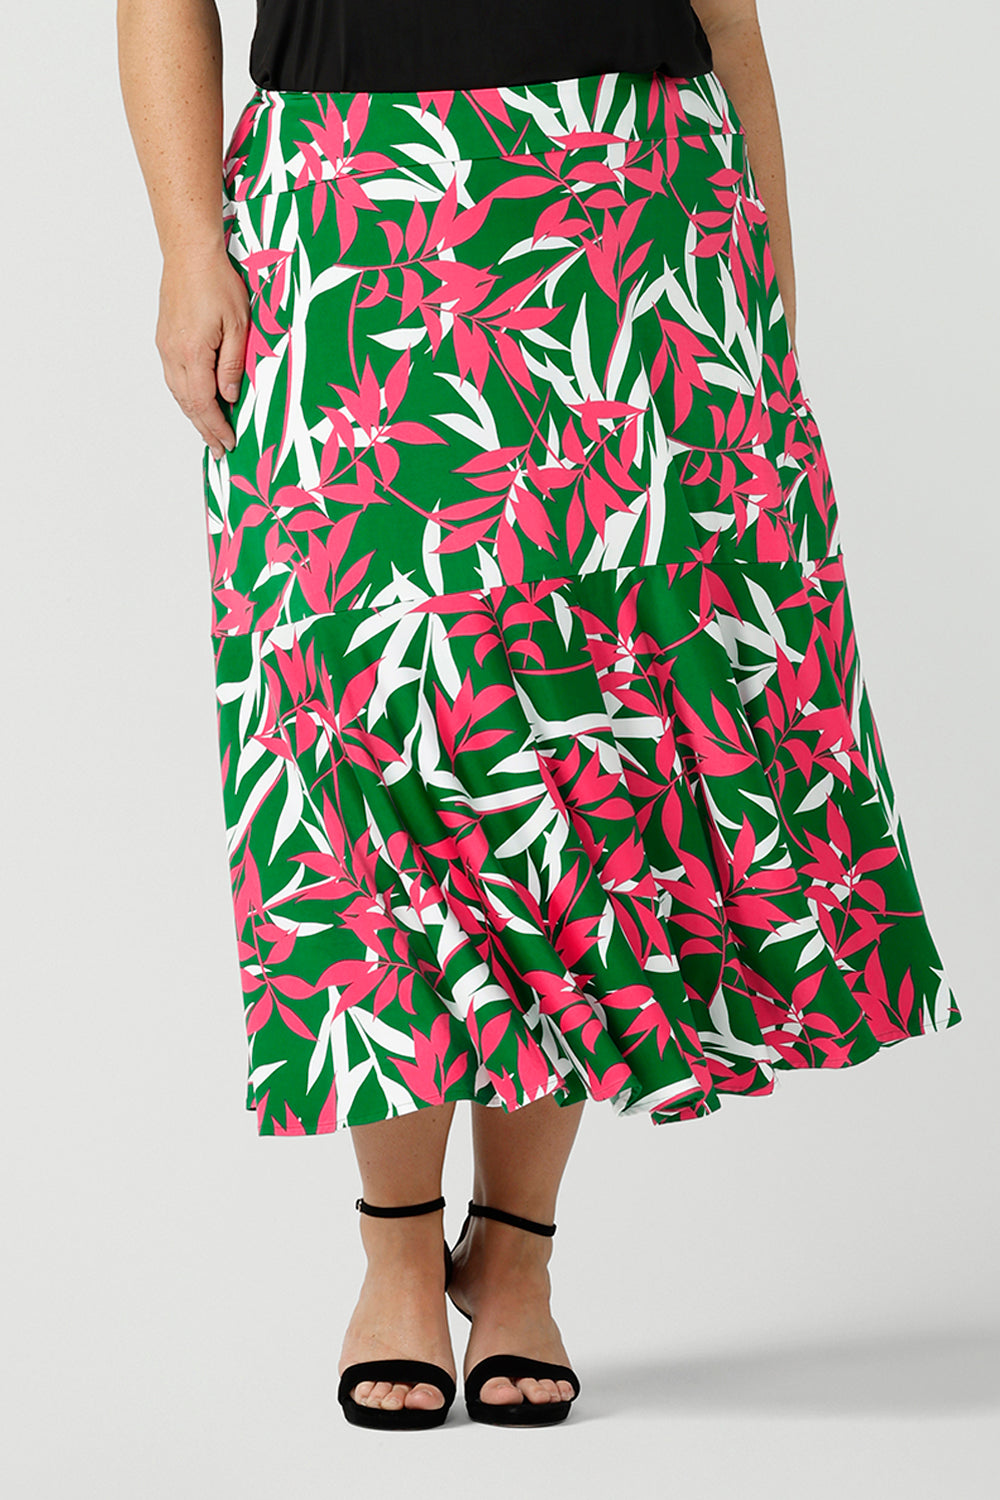 A size 12 woman wears a green jersey skirt with a leaf print. On a verdant green base in a soft jersey fabric. Styled back with black heels. Made in Australia for women size 8 - 24.